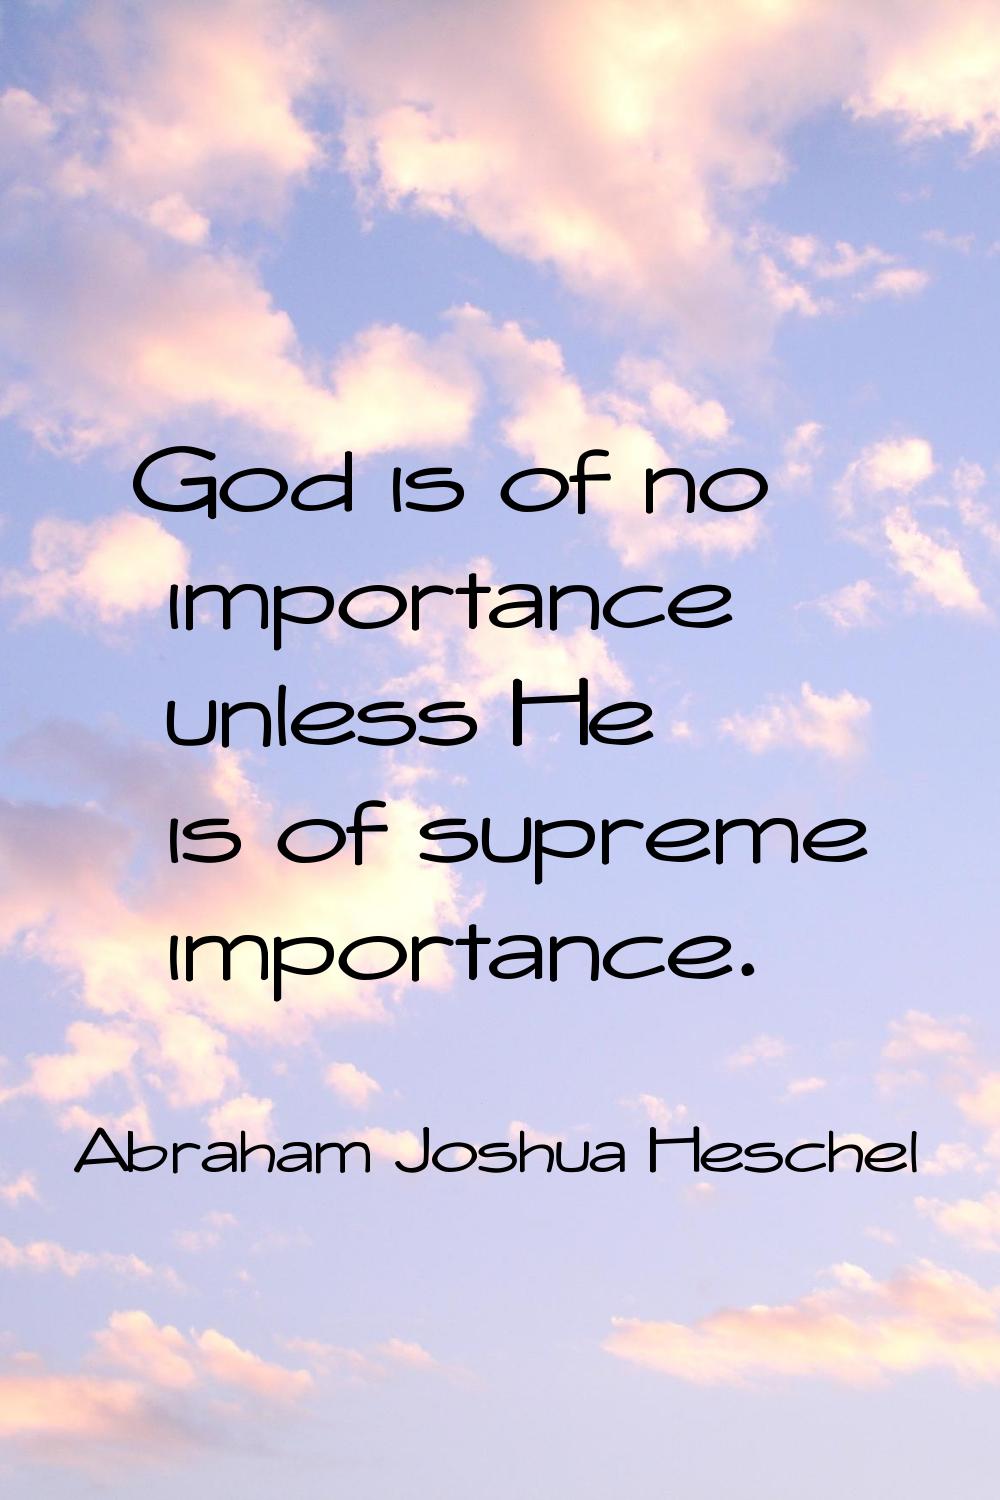 God is of no importance unless He is of supreme importance.